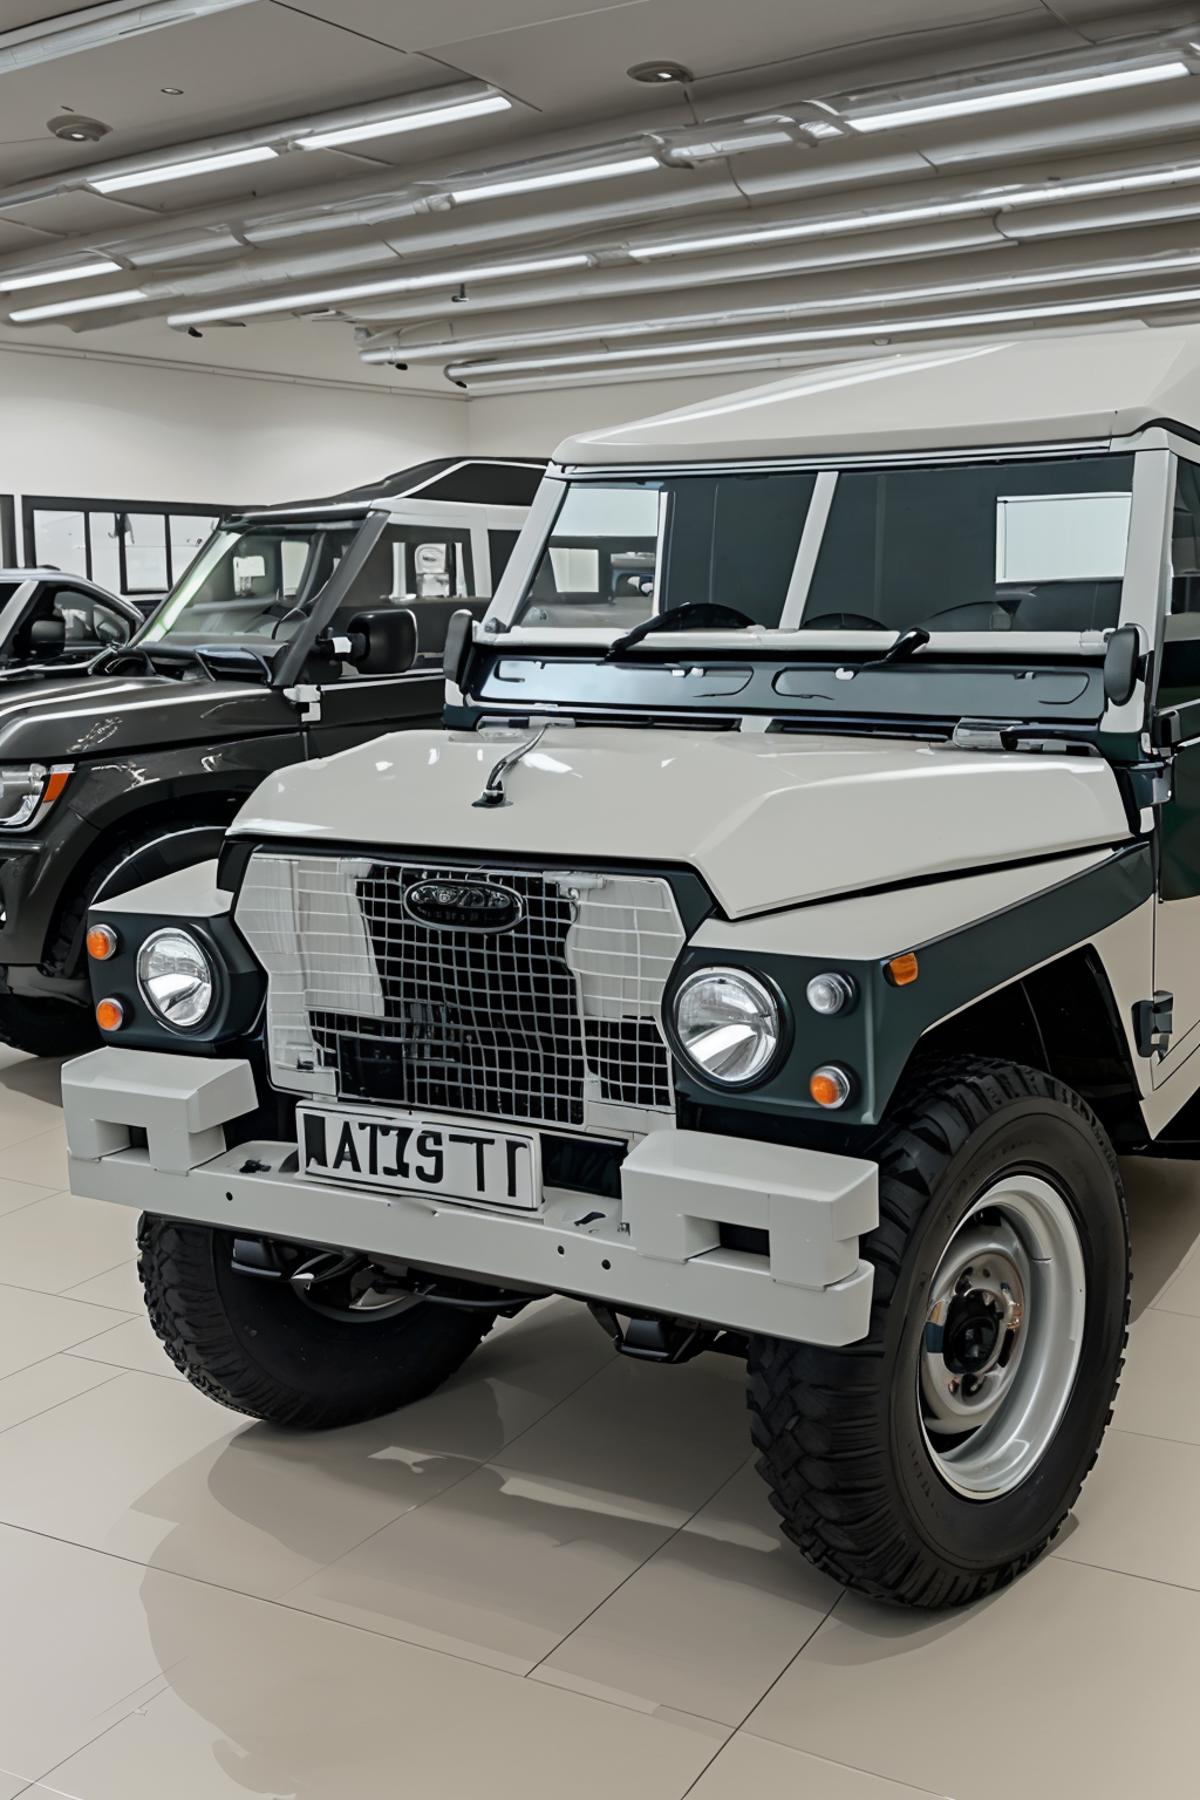 Land Rover Lightweight image by dbst17